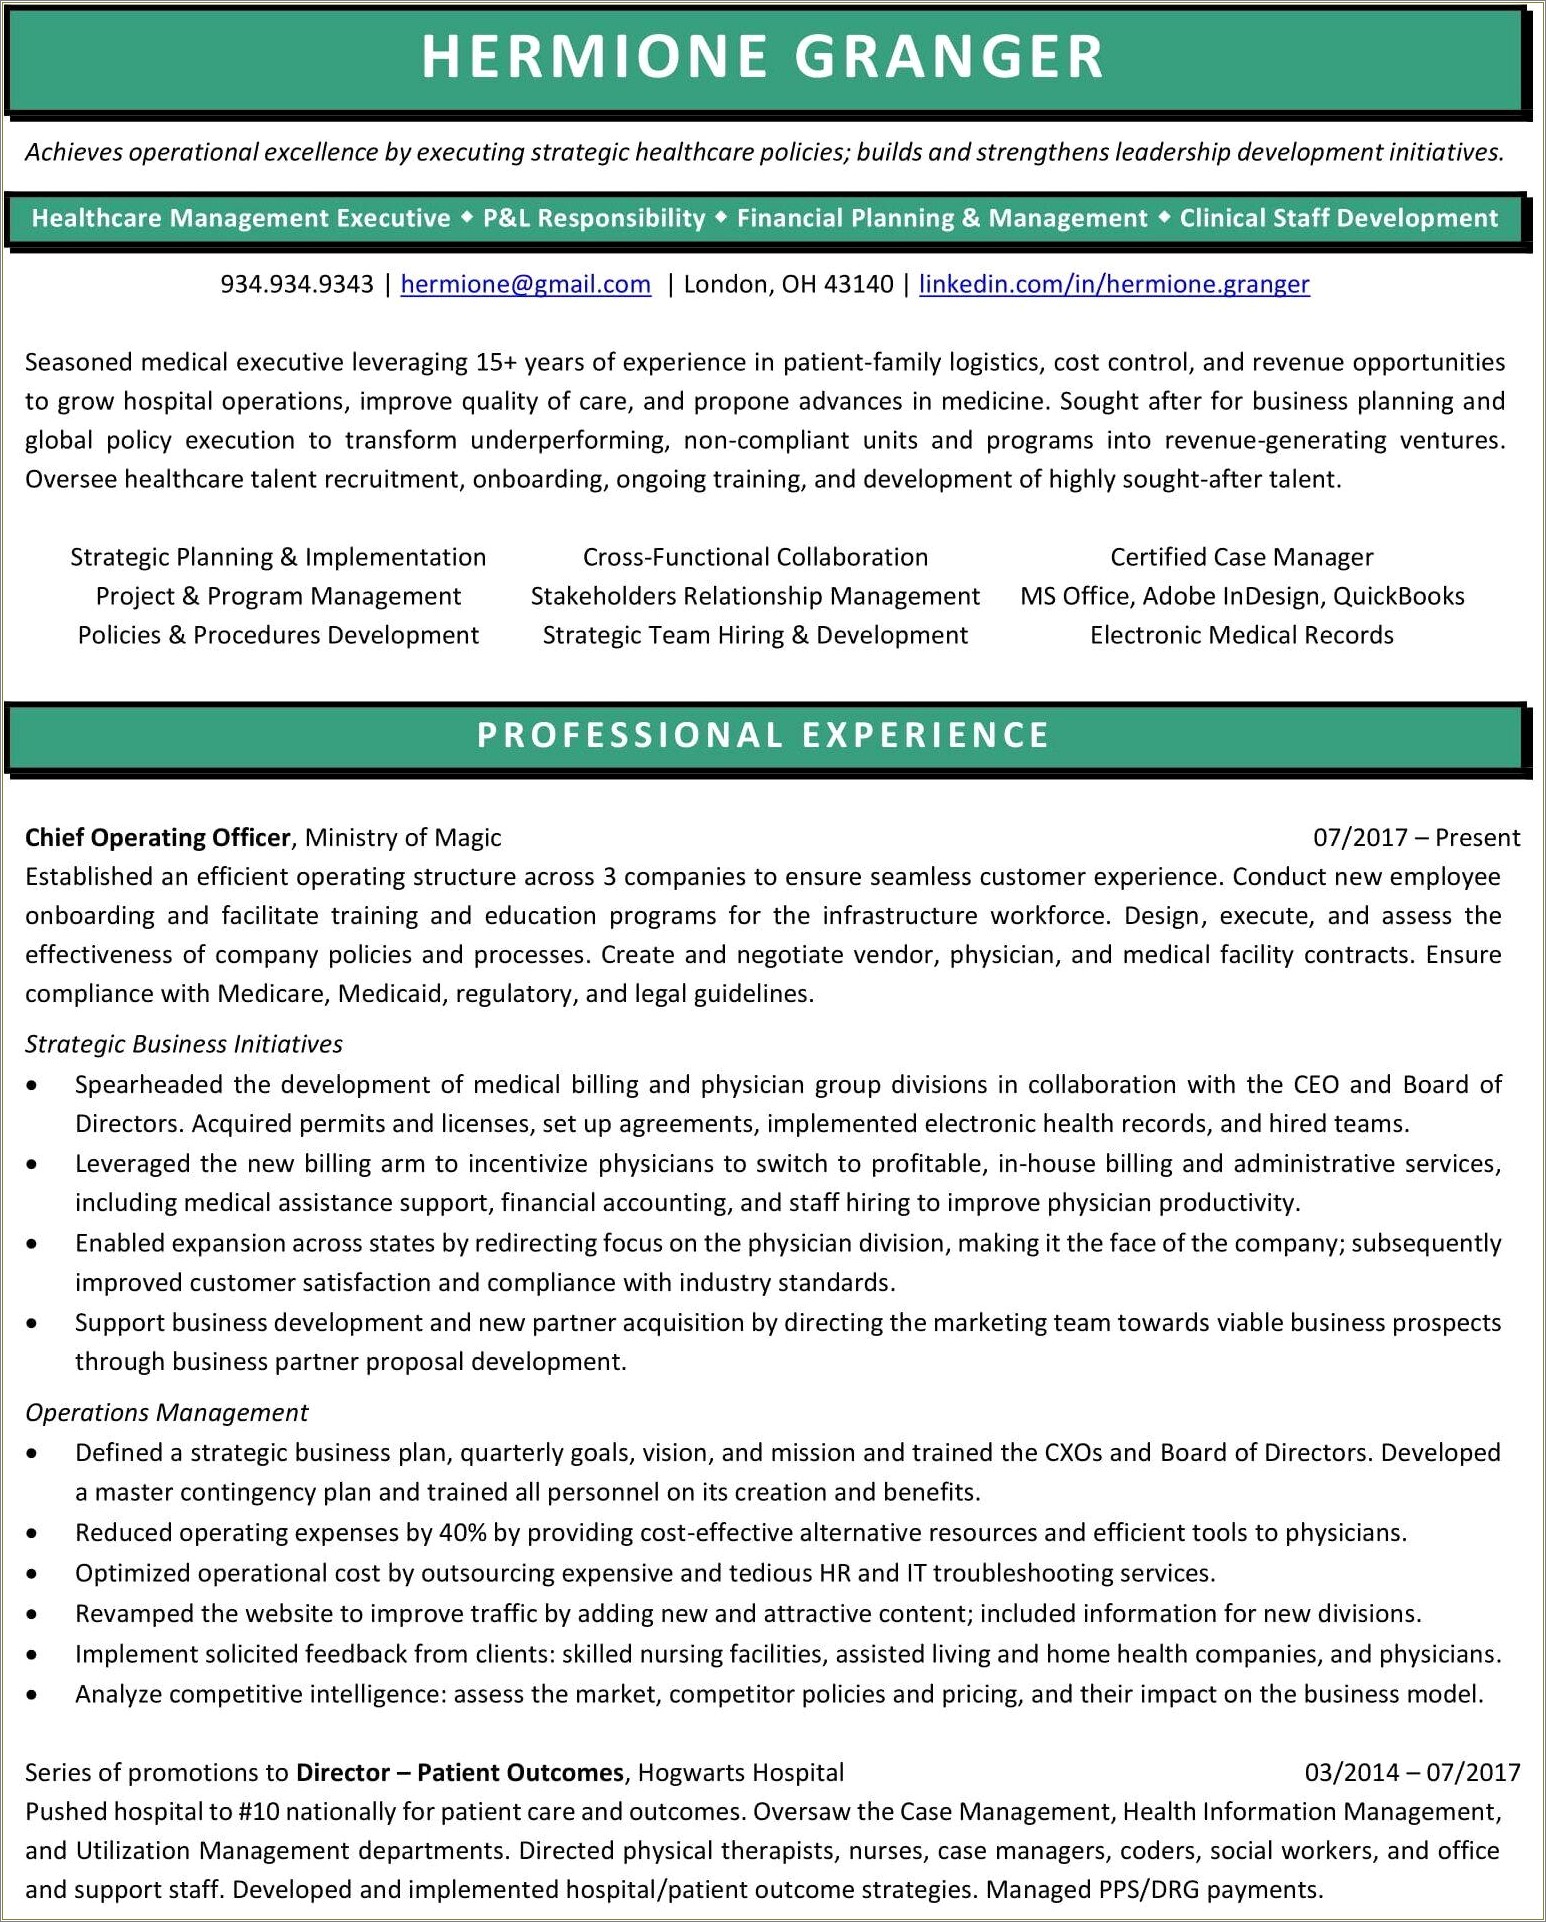 Resume Samples For Experienced It Professionals Pdf